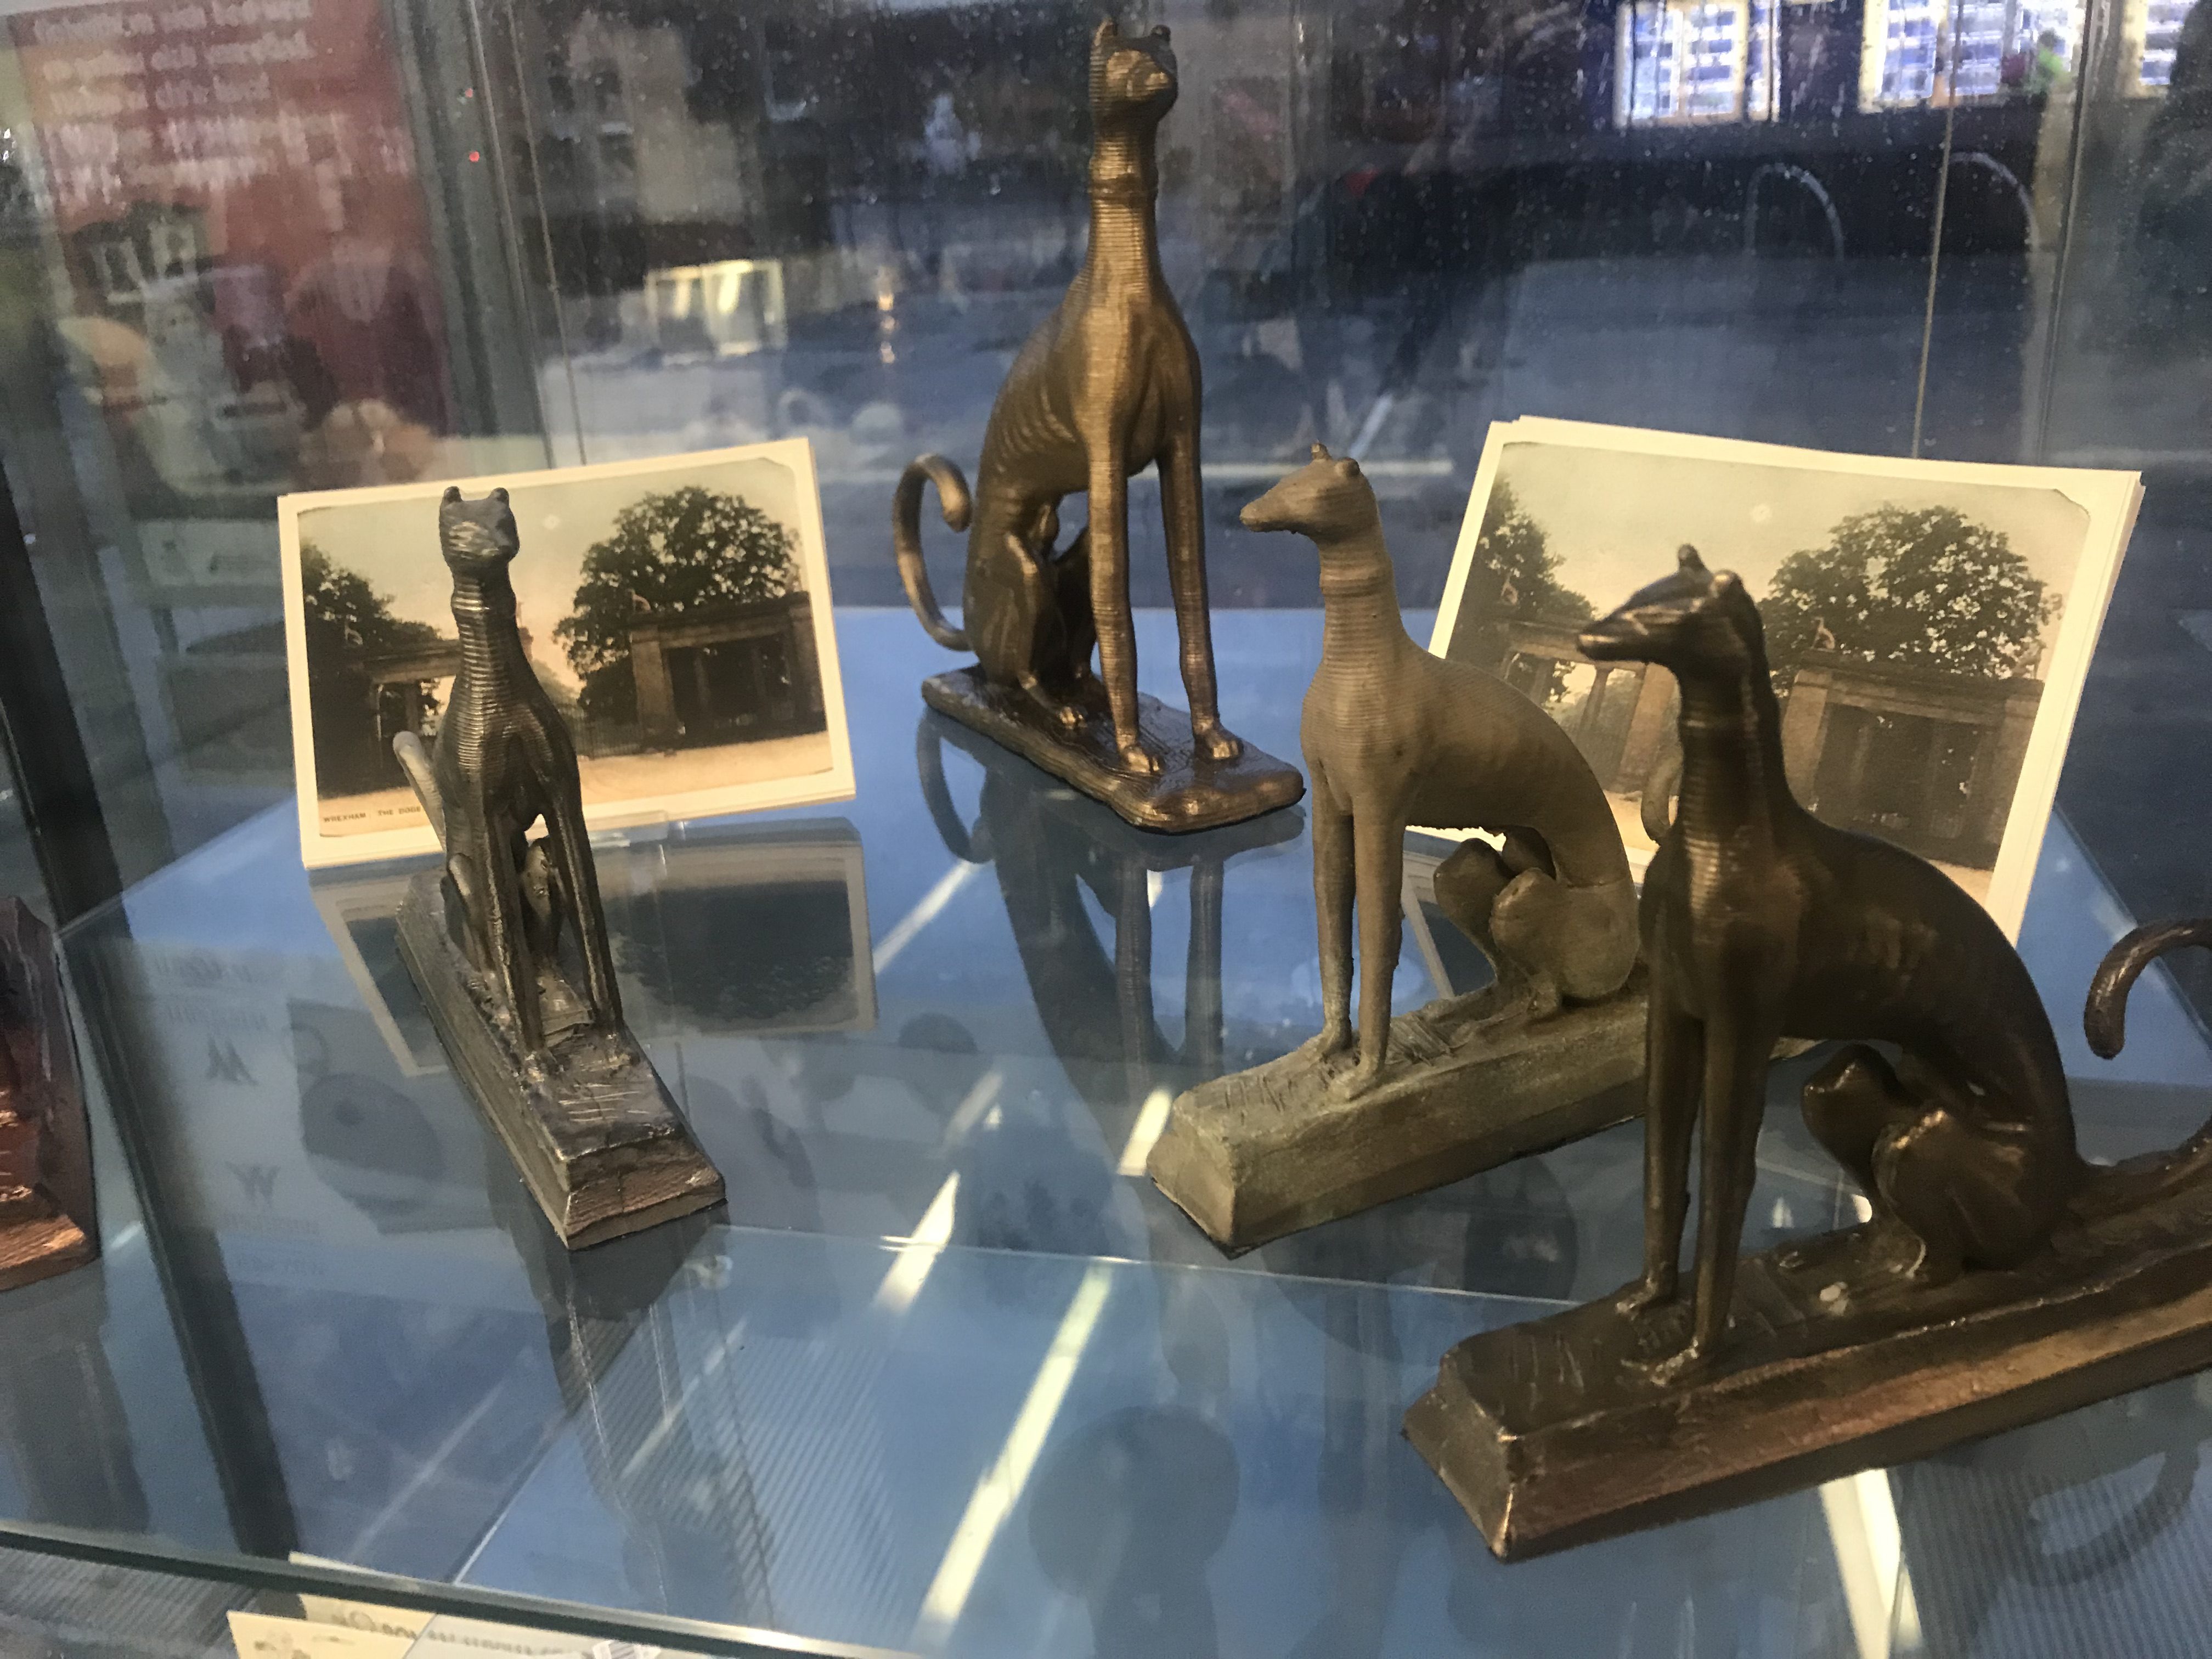 Own your own little piece of Wrexham's History - The Acton Dog